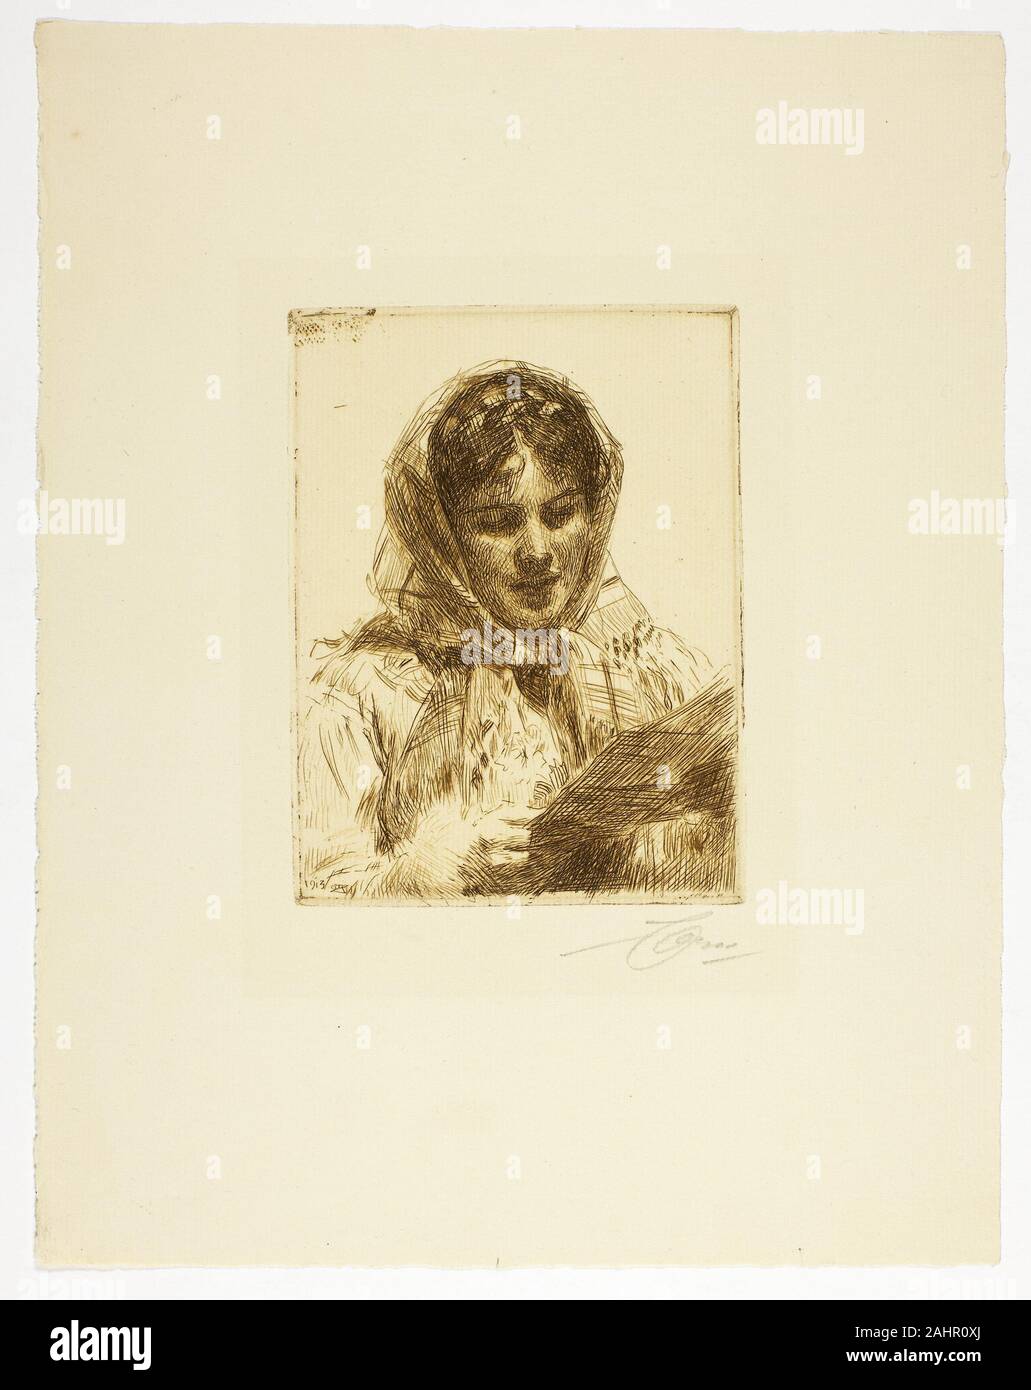 Anders Zorn. The Letter. 1913. Sweden. Etching in black on ivory laid paper Stock Photo